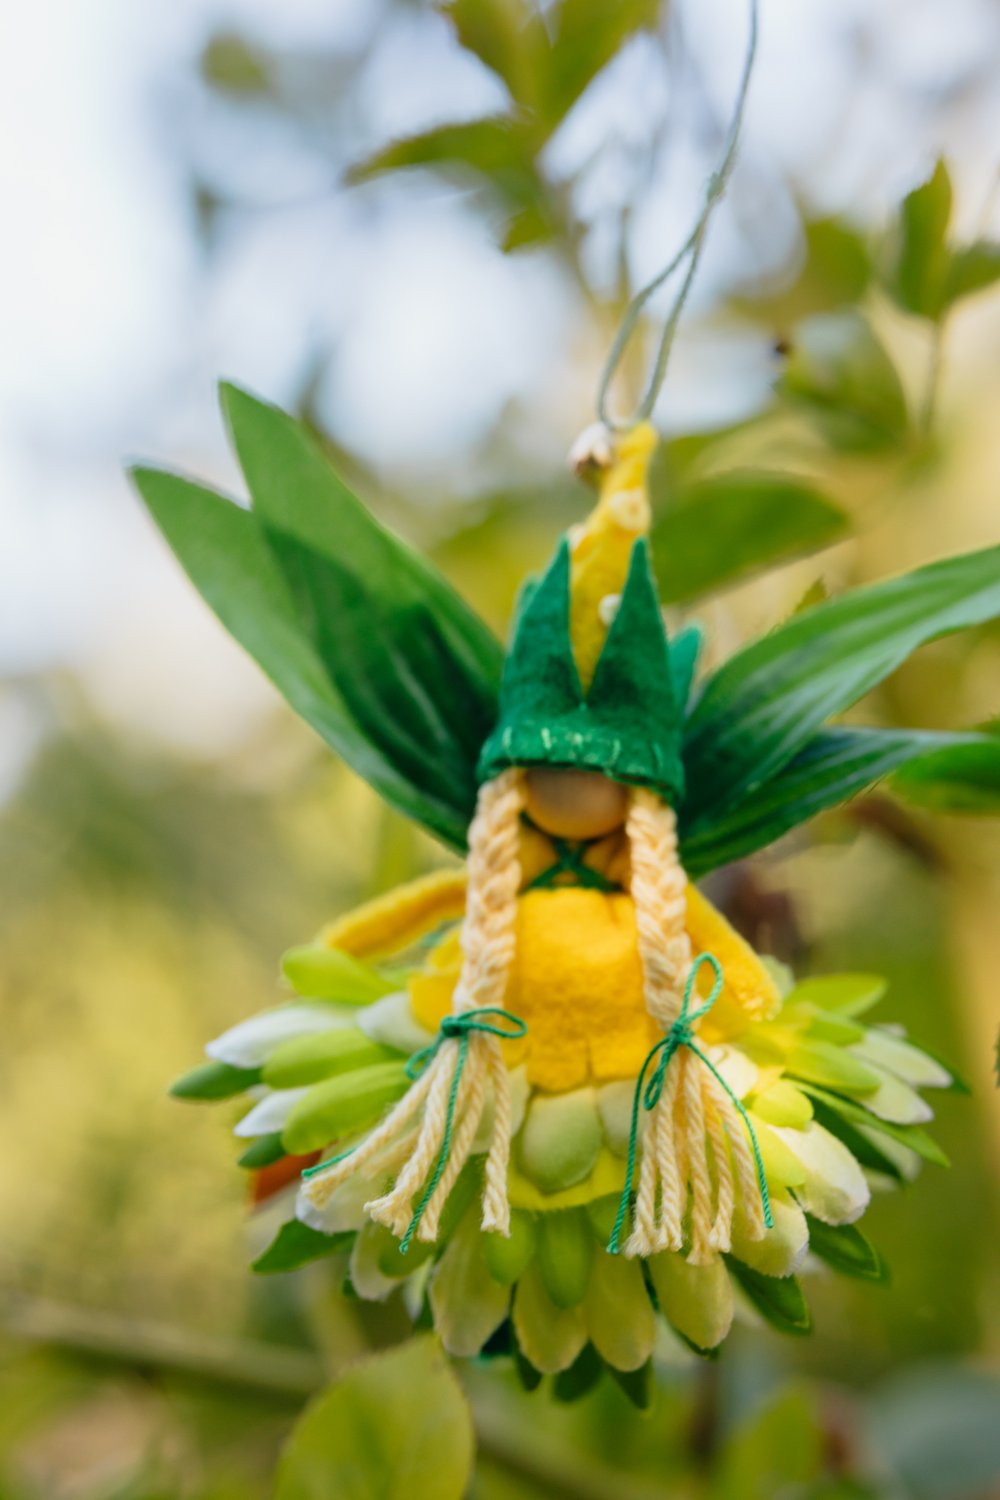 Forest Fairy Crafts Giveaway - Cornelia the Corn Fairy by Lenka